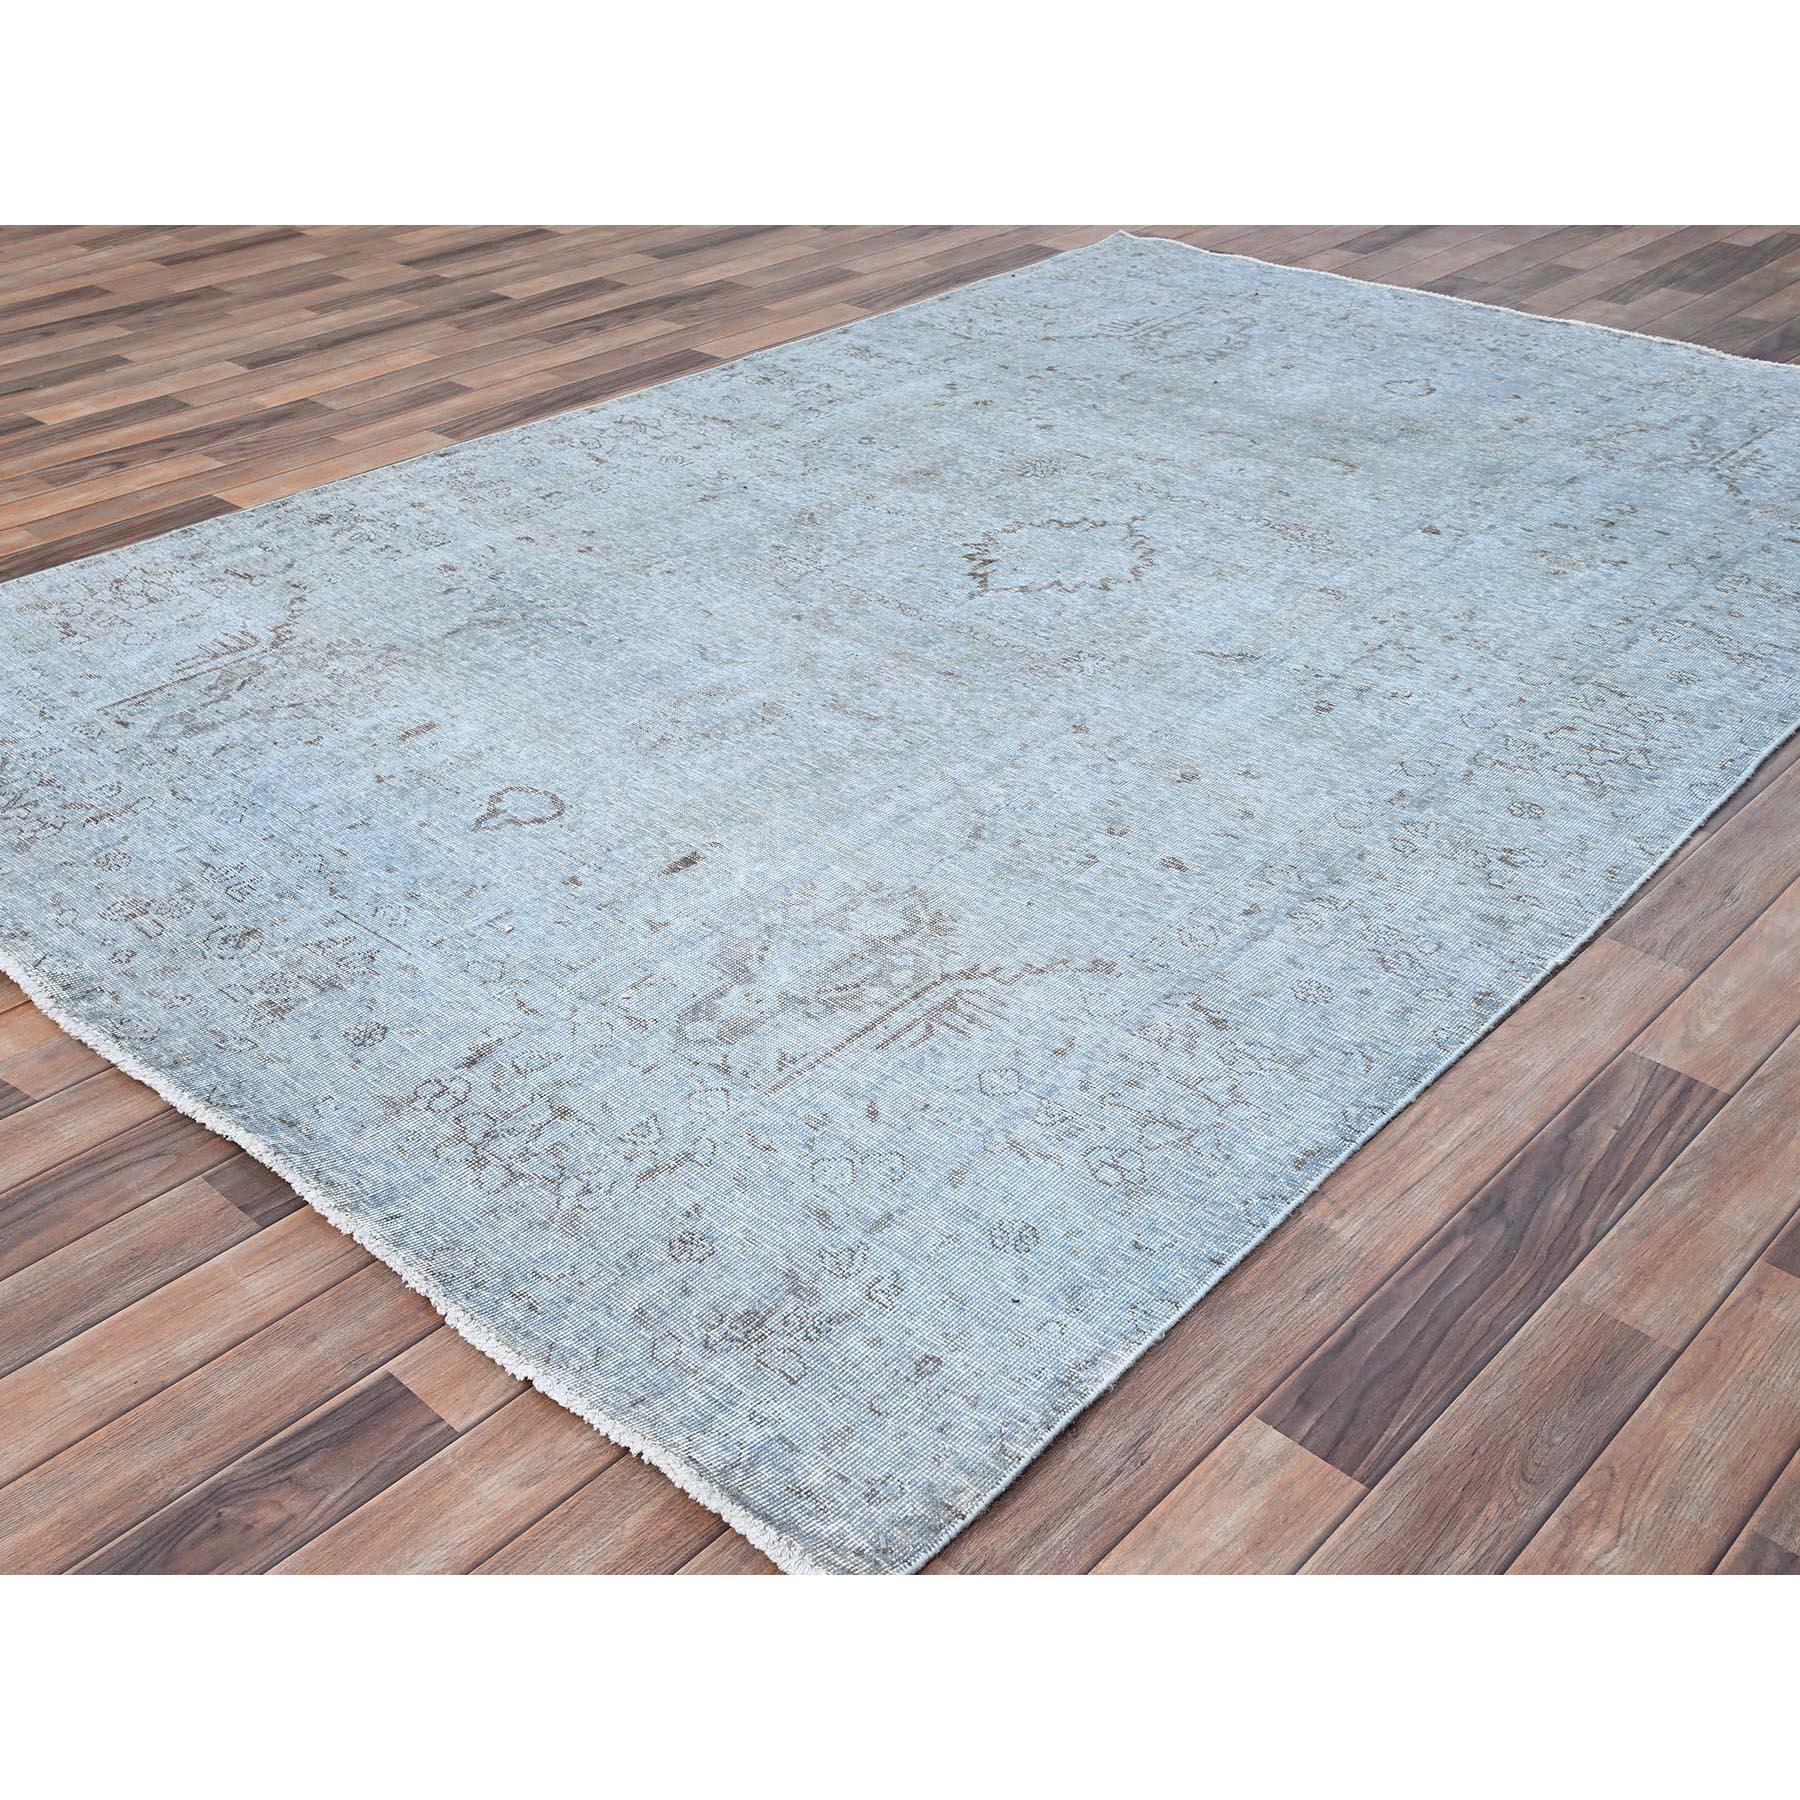 Light Turquoise Overdyed Old Persian Tabriz Rustic Feel Wool Hand Knotted Rug In Fair Condition For Sale In Carlstadt, NJ